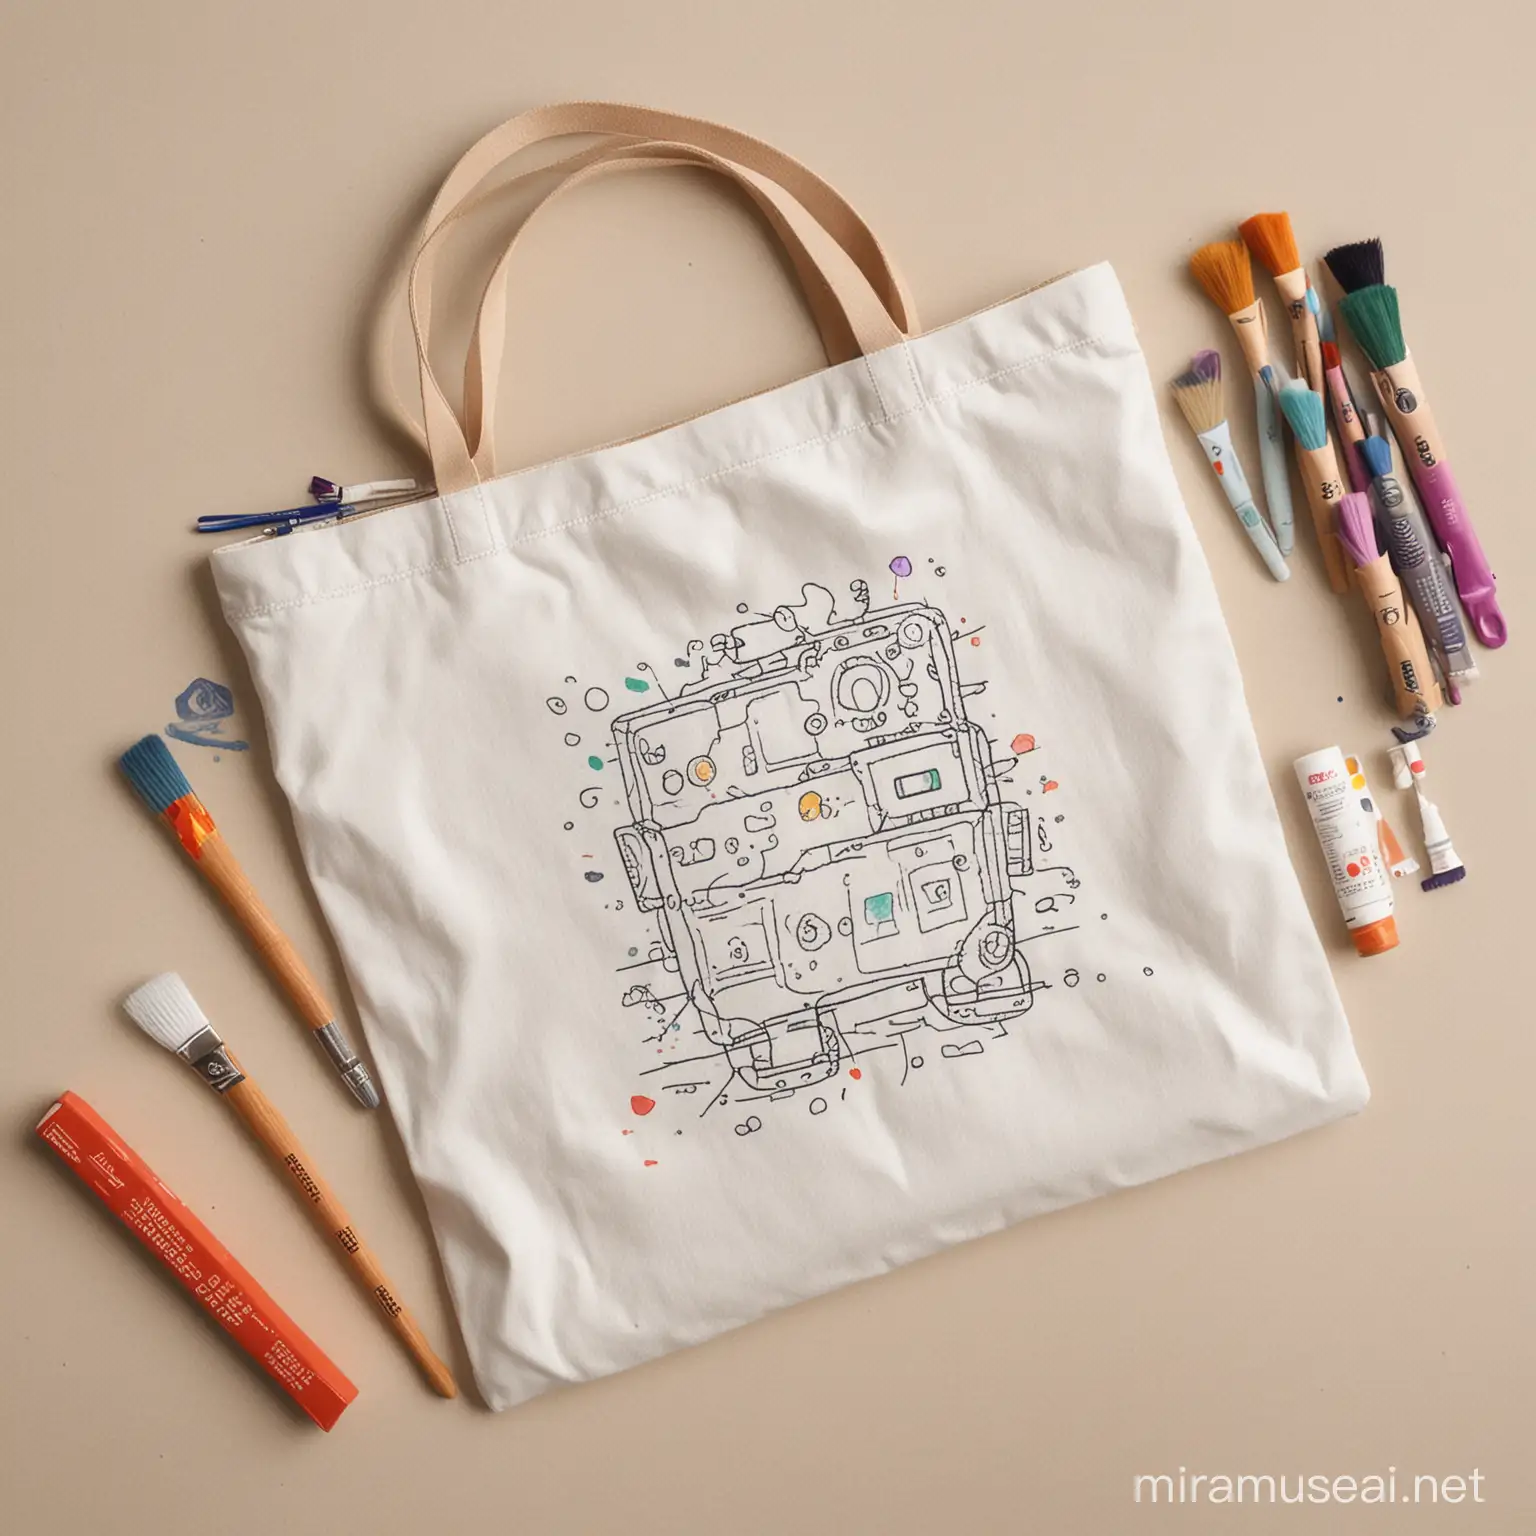 Sketch an ideation of toy design kit contains White canvas bag, painintg colors, brushes, stamps. the concept is to paint the bag to make it personalized with the help of given colors and stamps in a kit